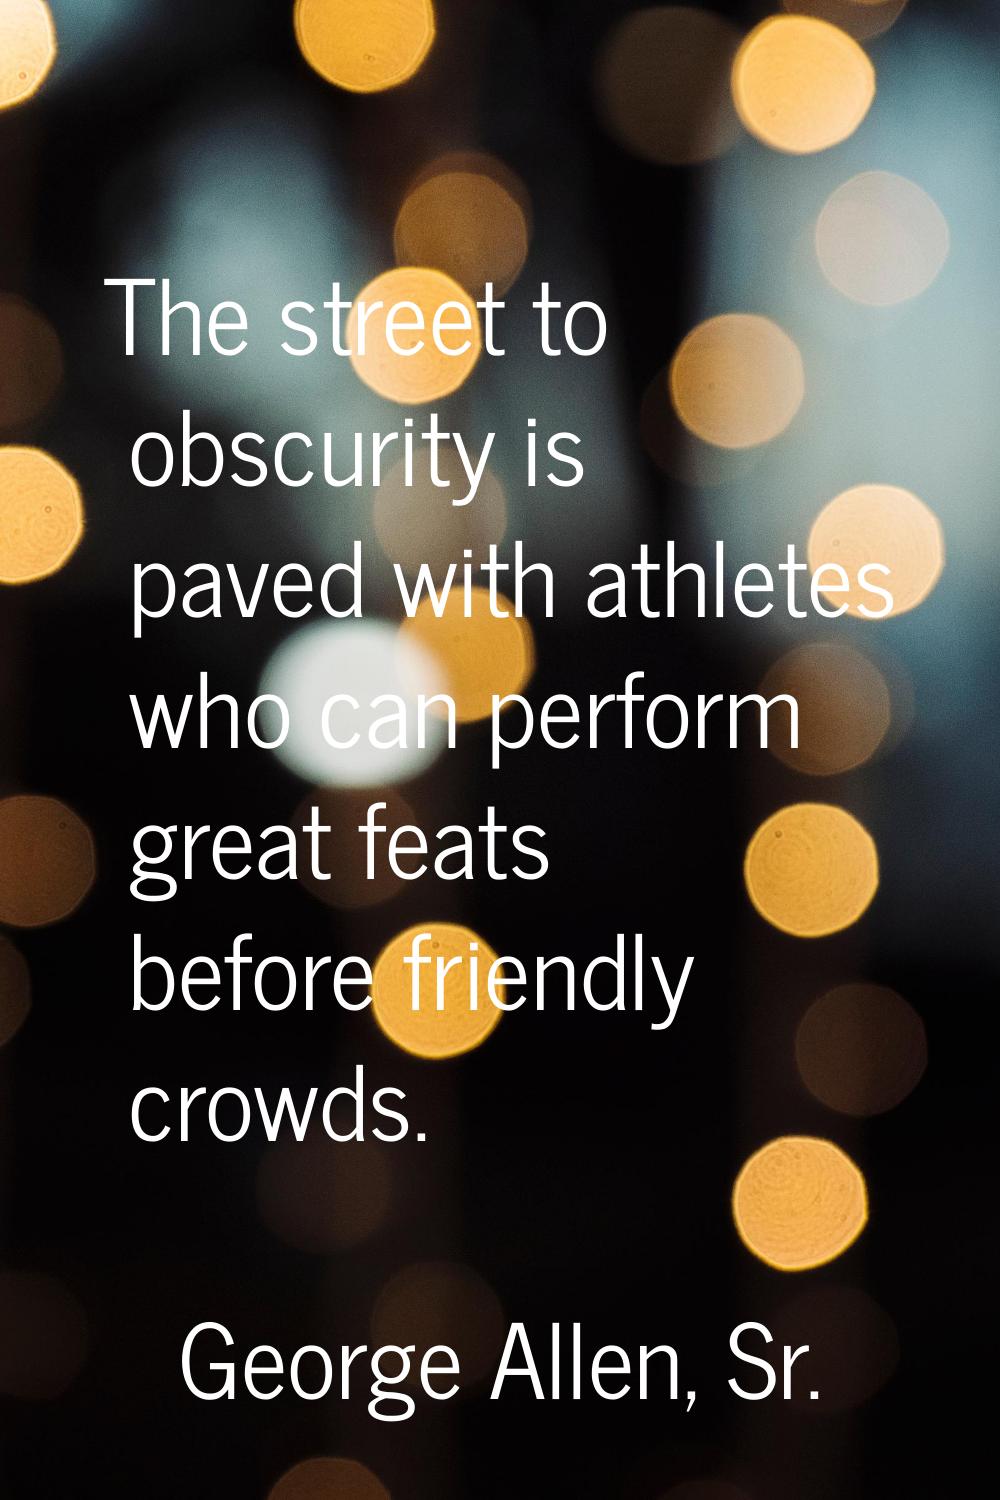 The street to obscurity is paved with athletes who can perform great feats before friendly crowds.